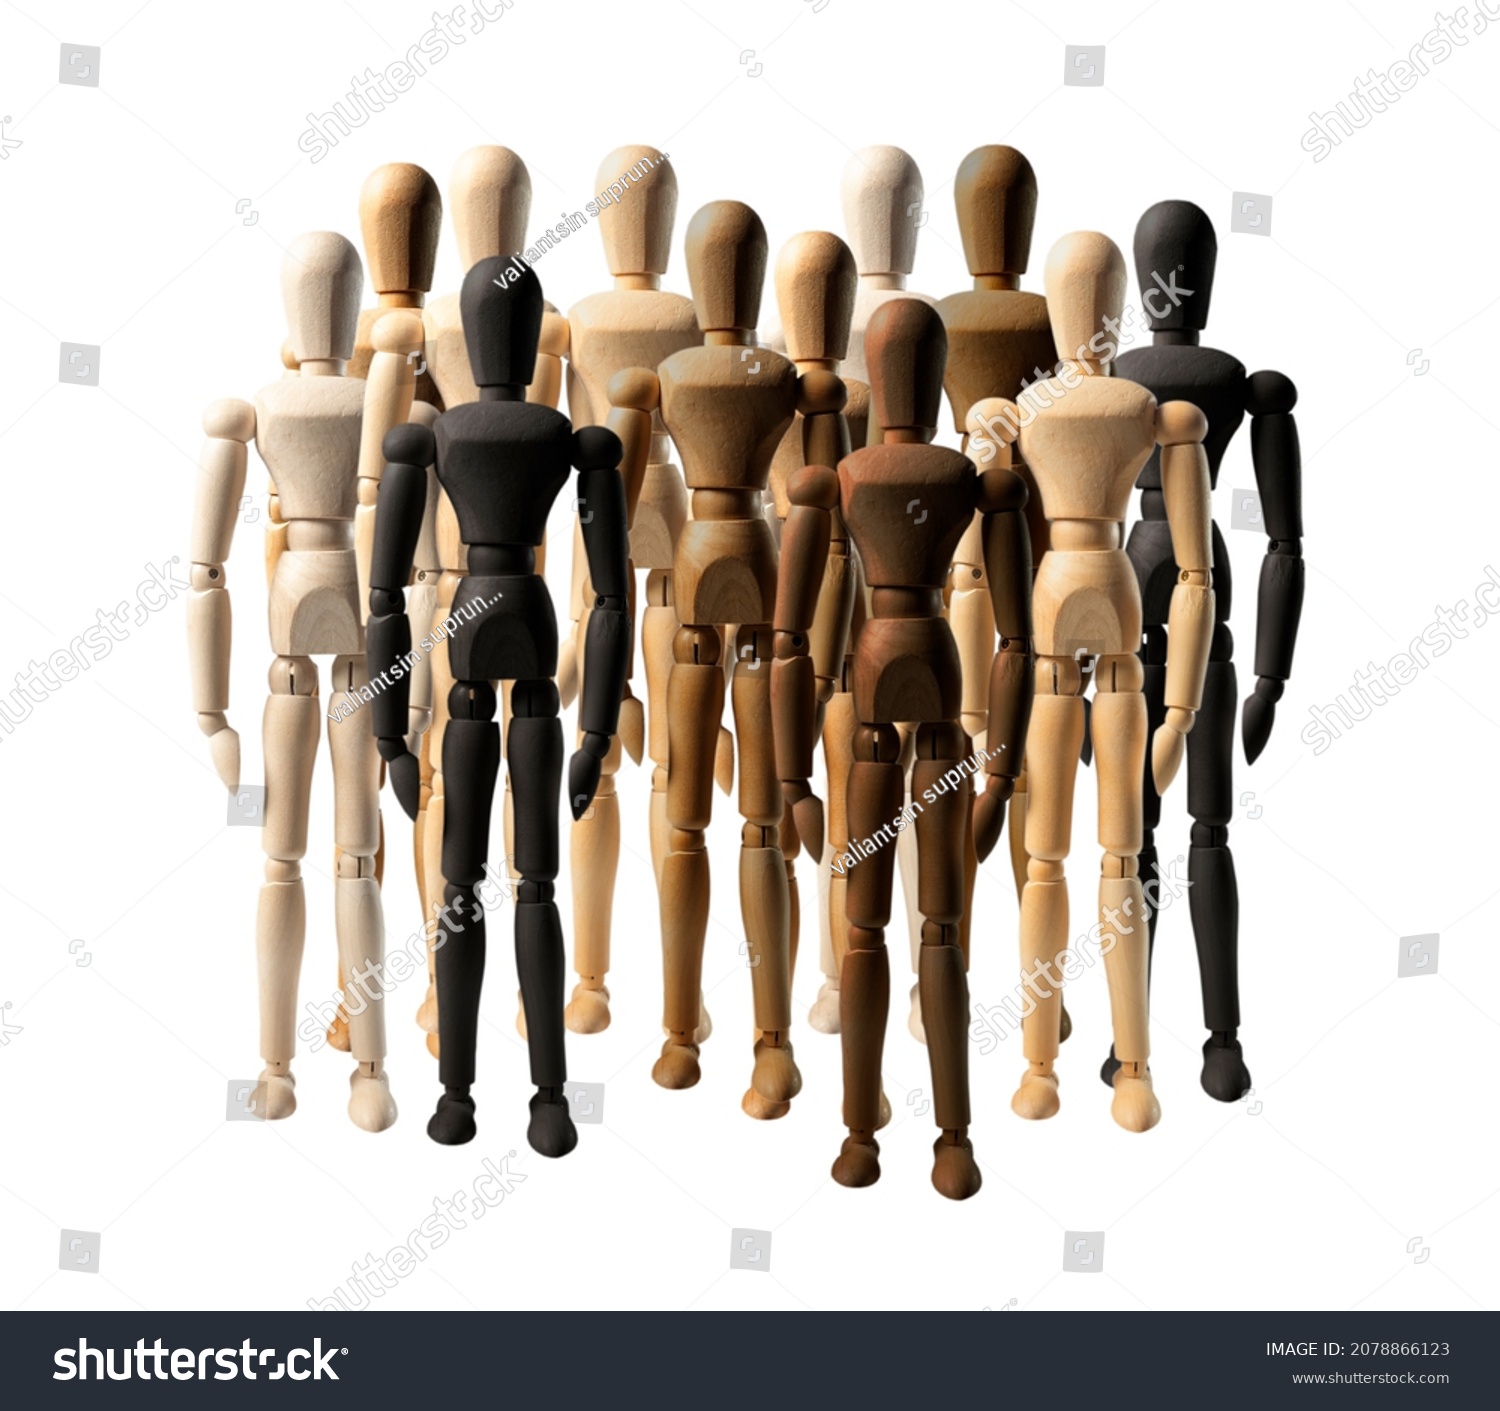 Abstract diverse society. Crowd of wood people of different color, race, ethnicity isolated on white background. Diversity and racial tolerance concept. #2078866123